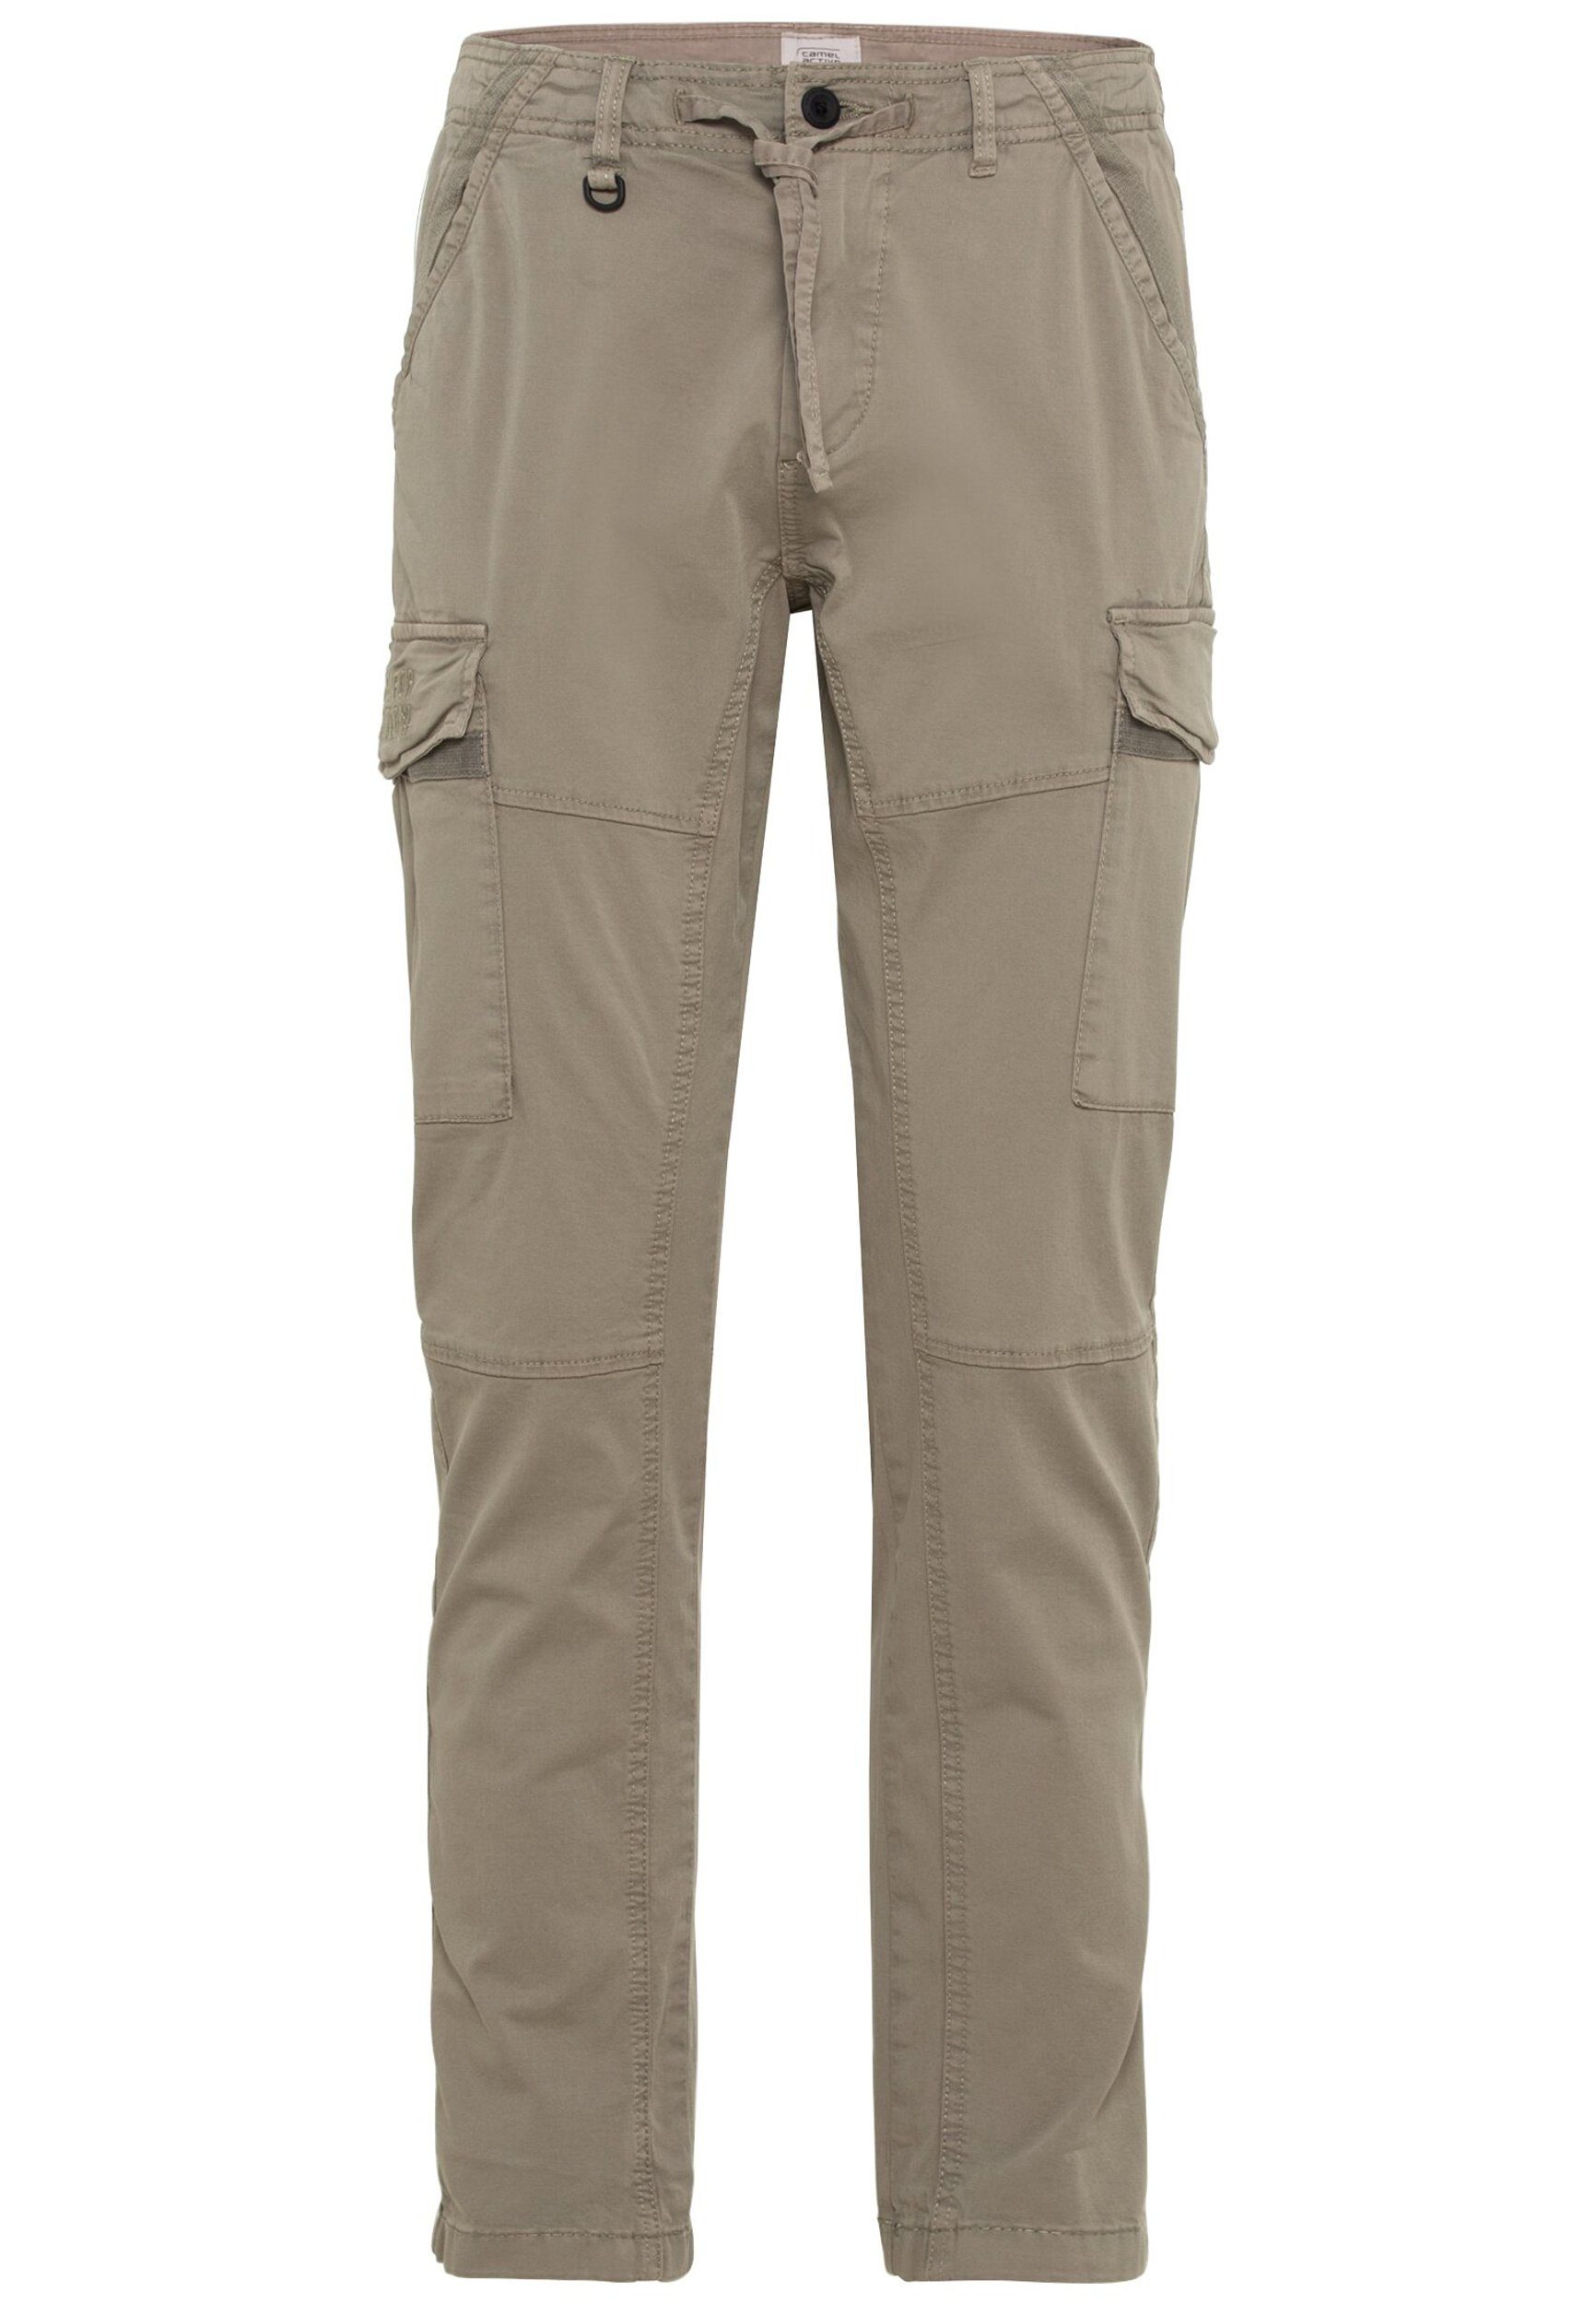 camel active Cargohose Cargo Hose in Tapered Fit